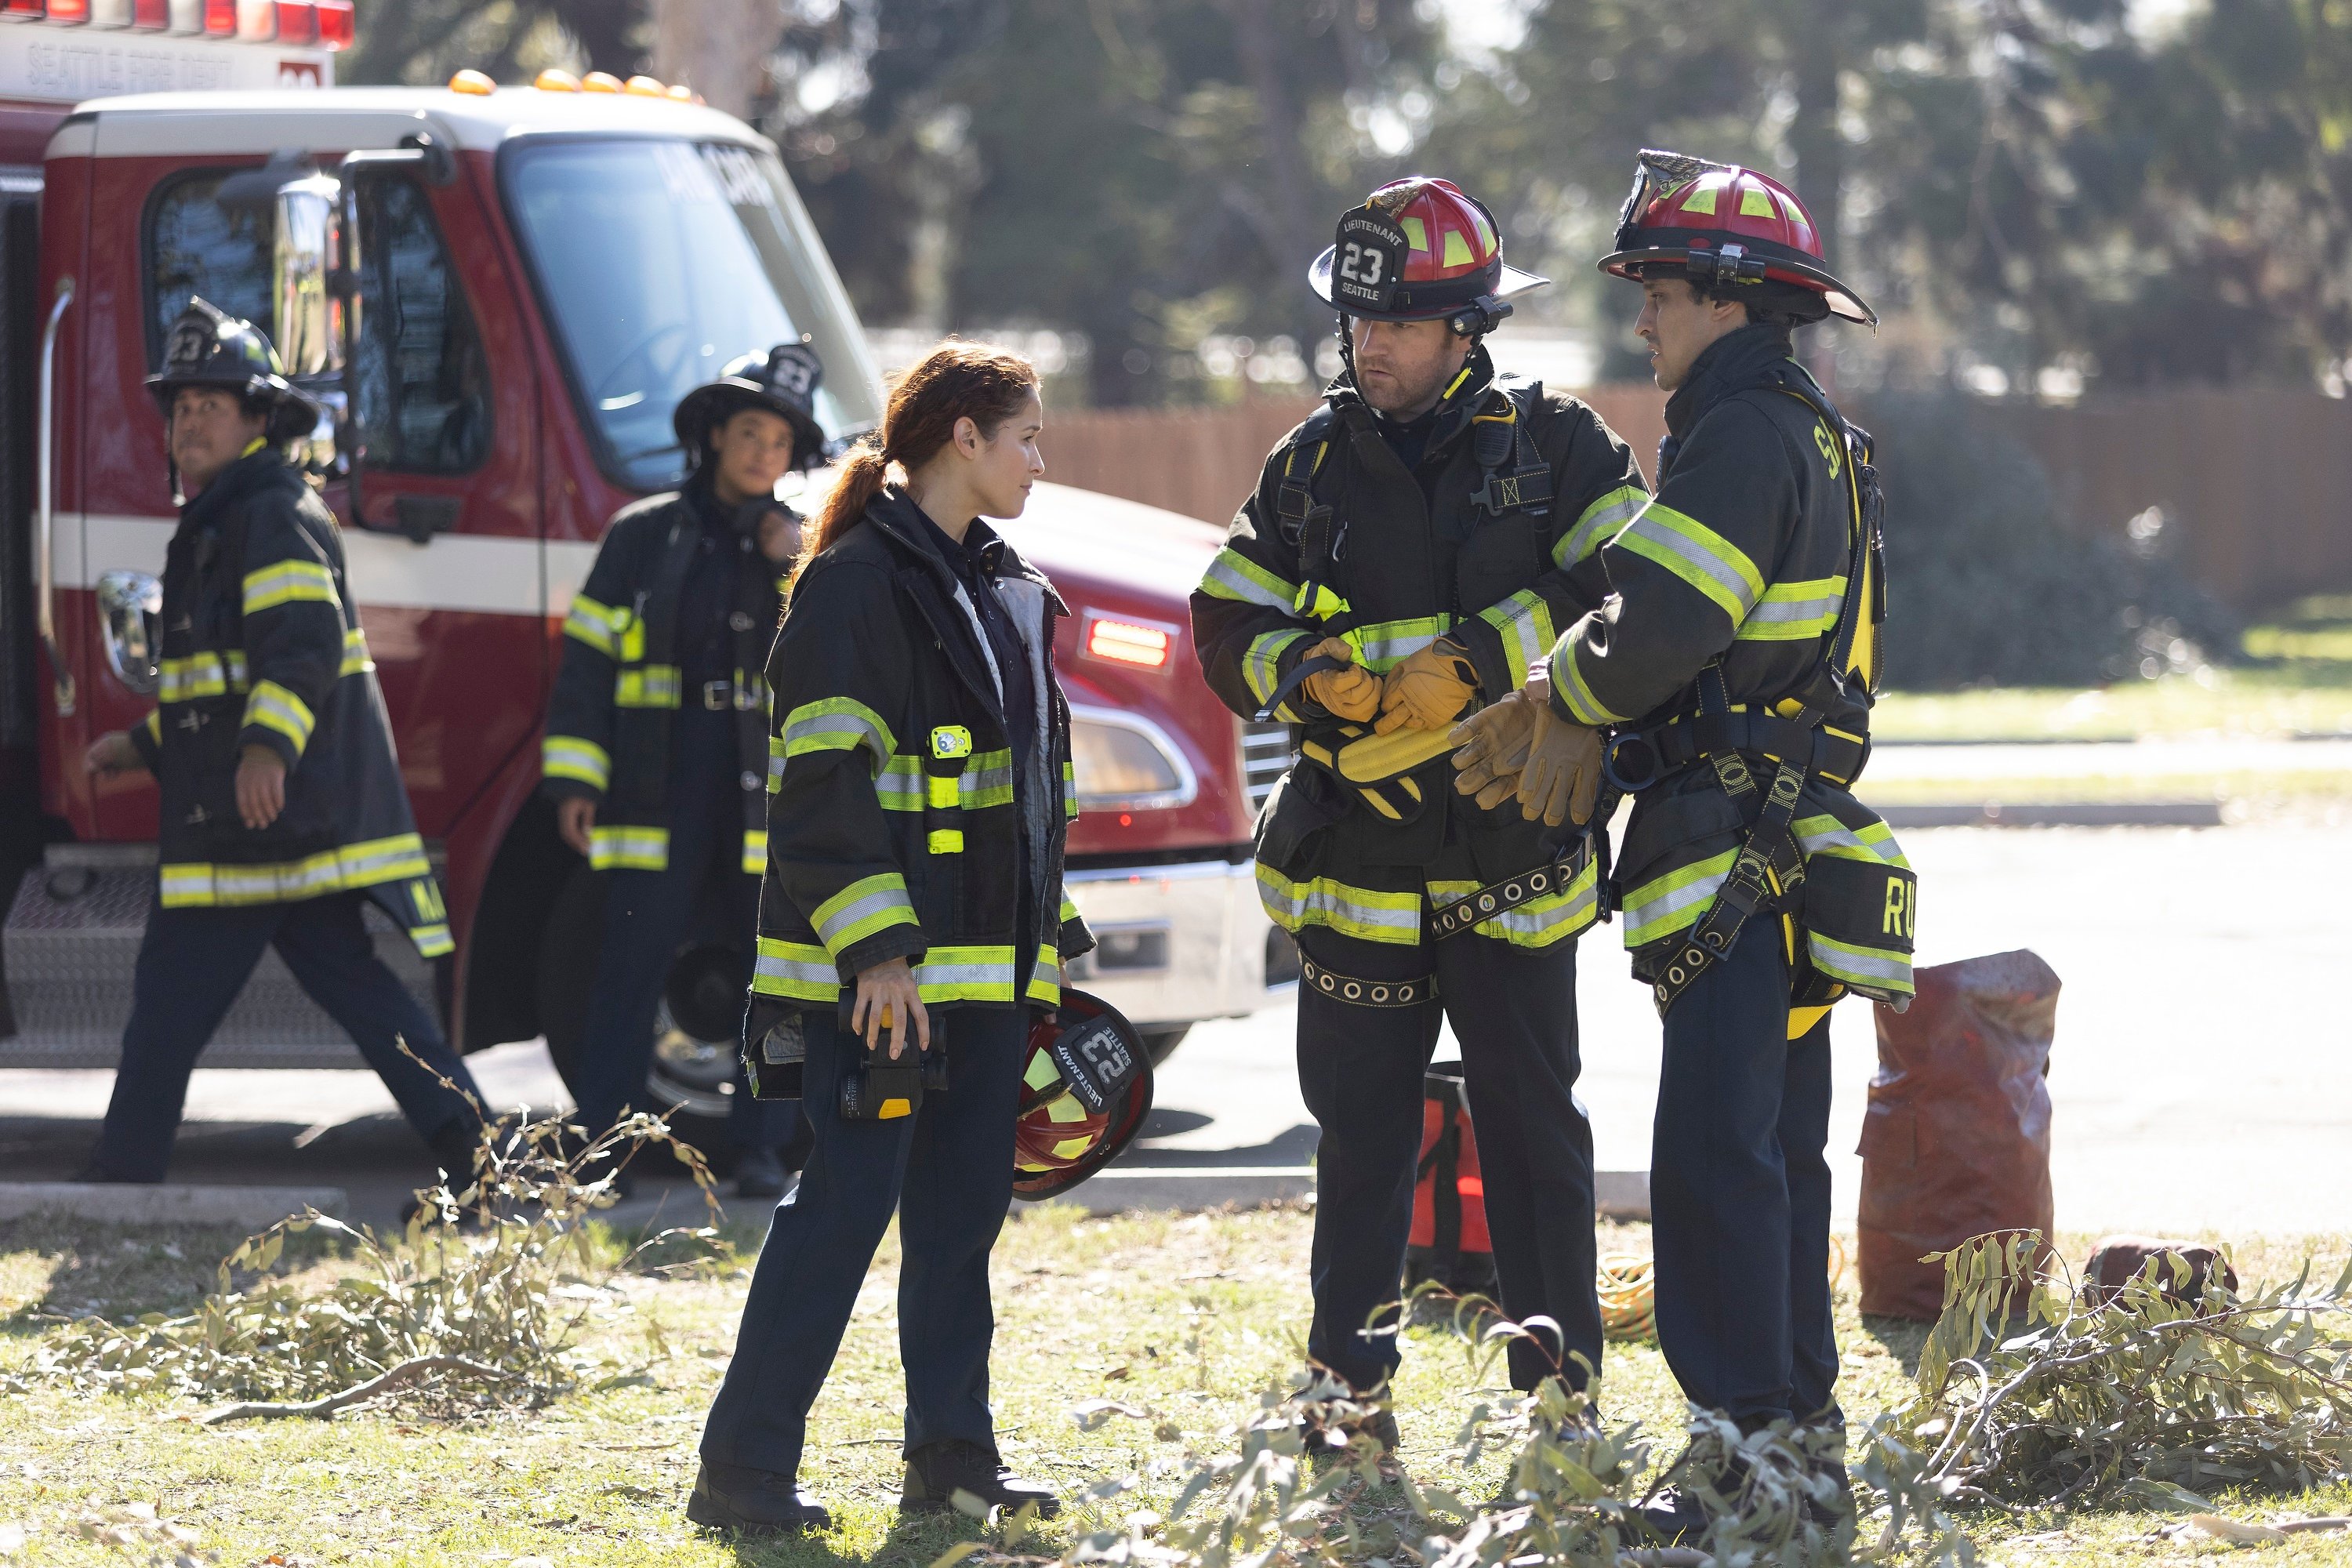 'Station 19' Jaina Lee Ortiz as Andy Herrera in her fire gear with several other fire fighters